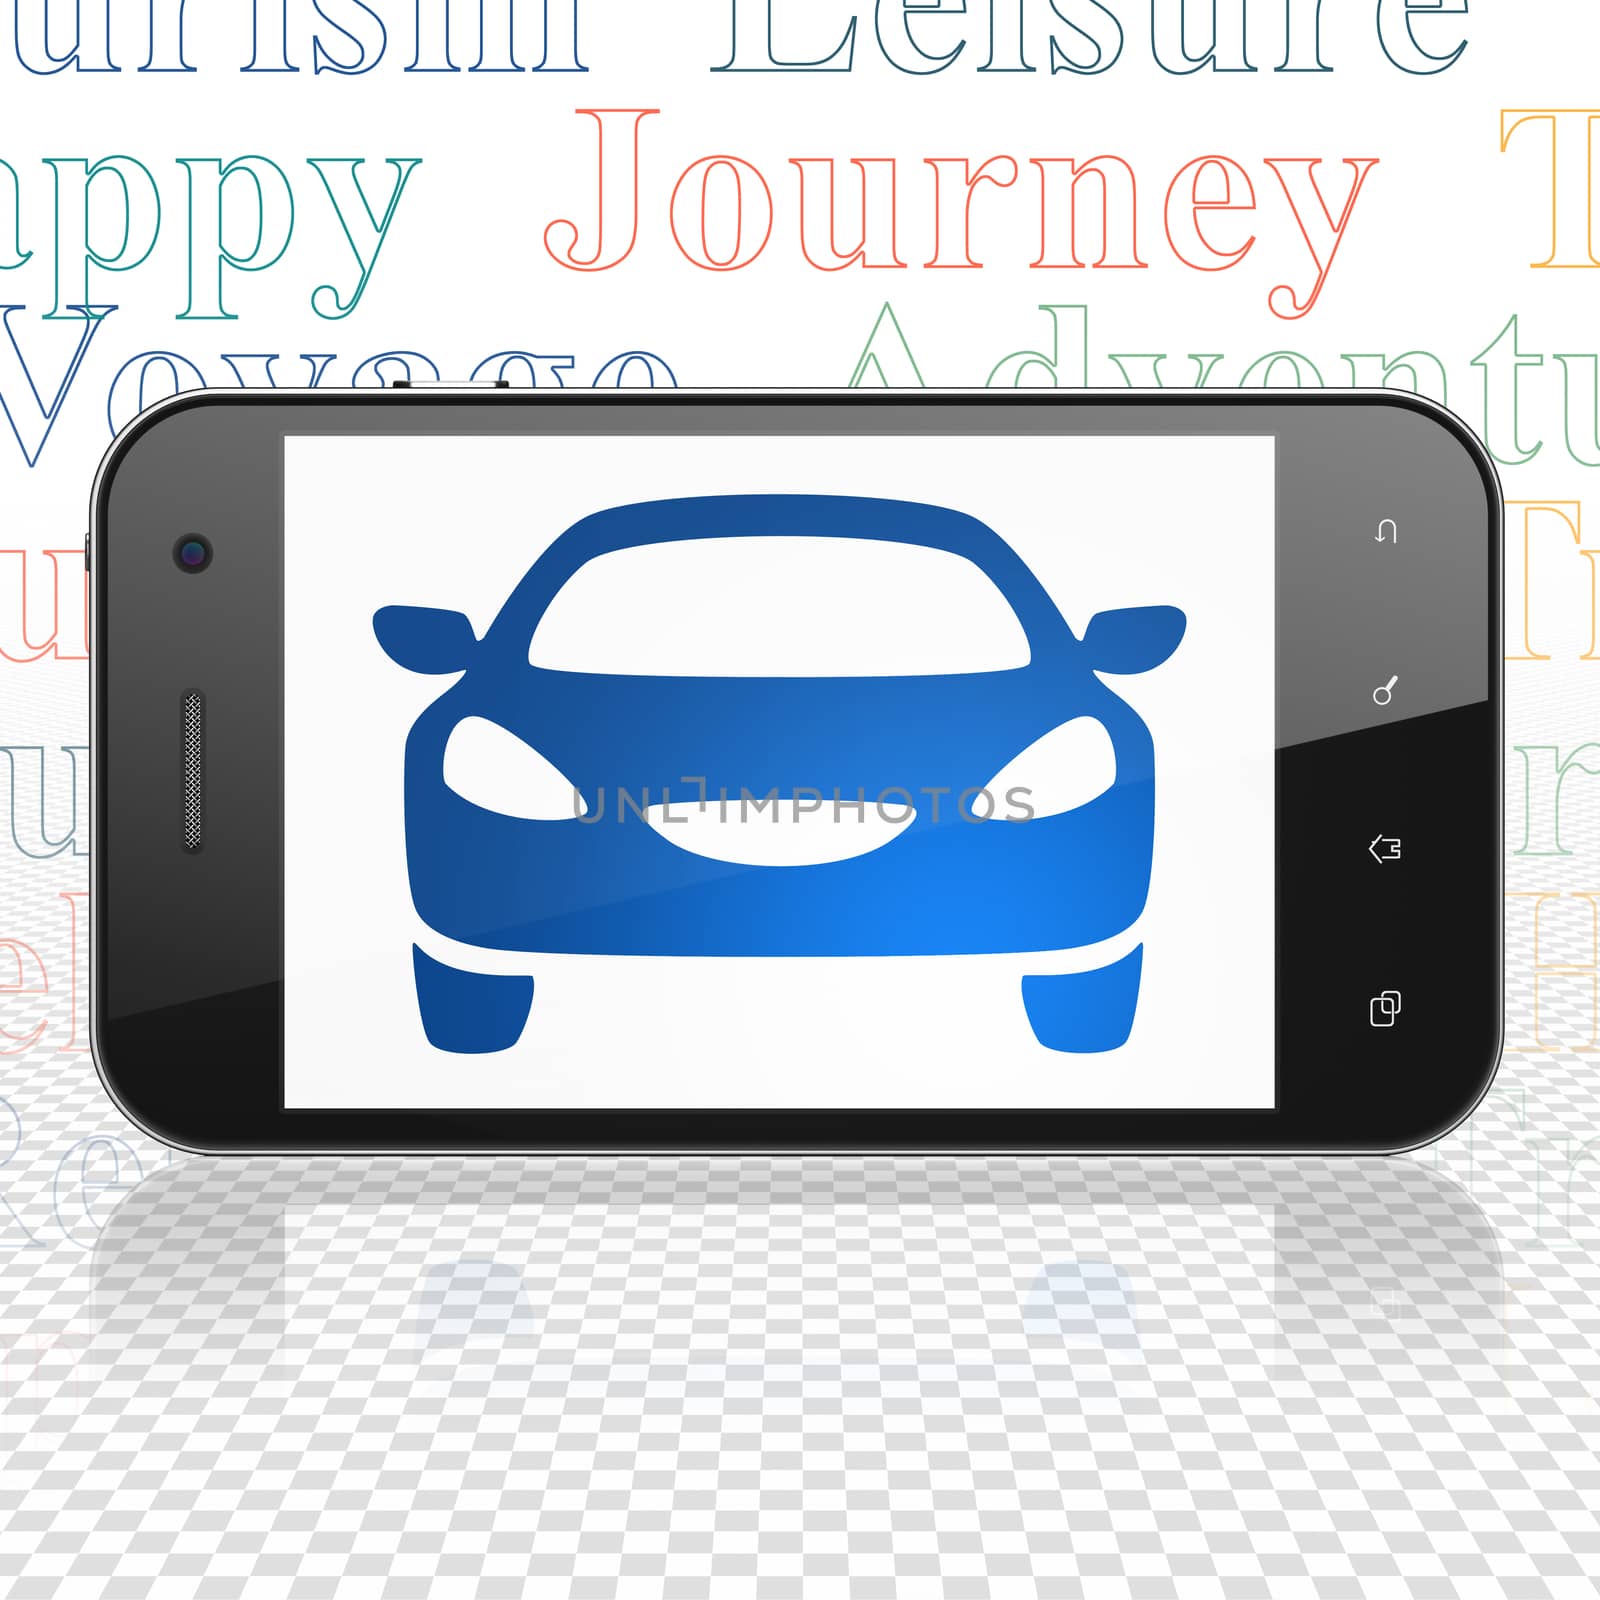 Vacation concept: Smartphone with  blue Car icon on display,  Tag Cloud background, 3D rendering